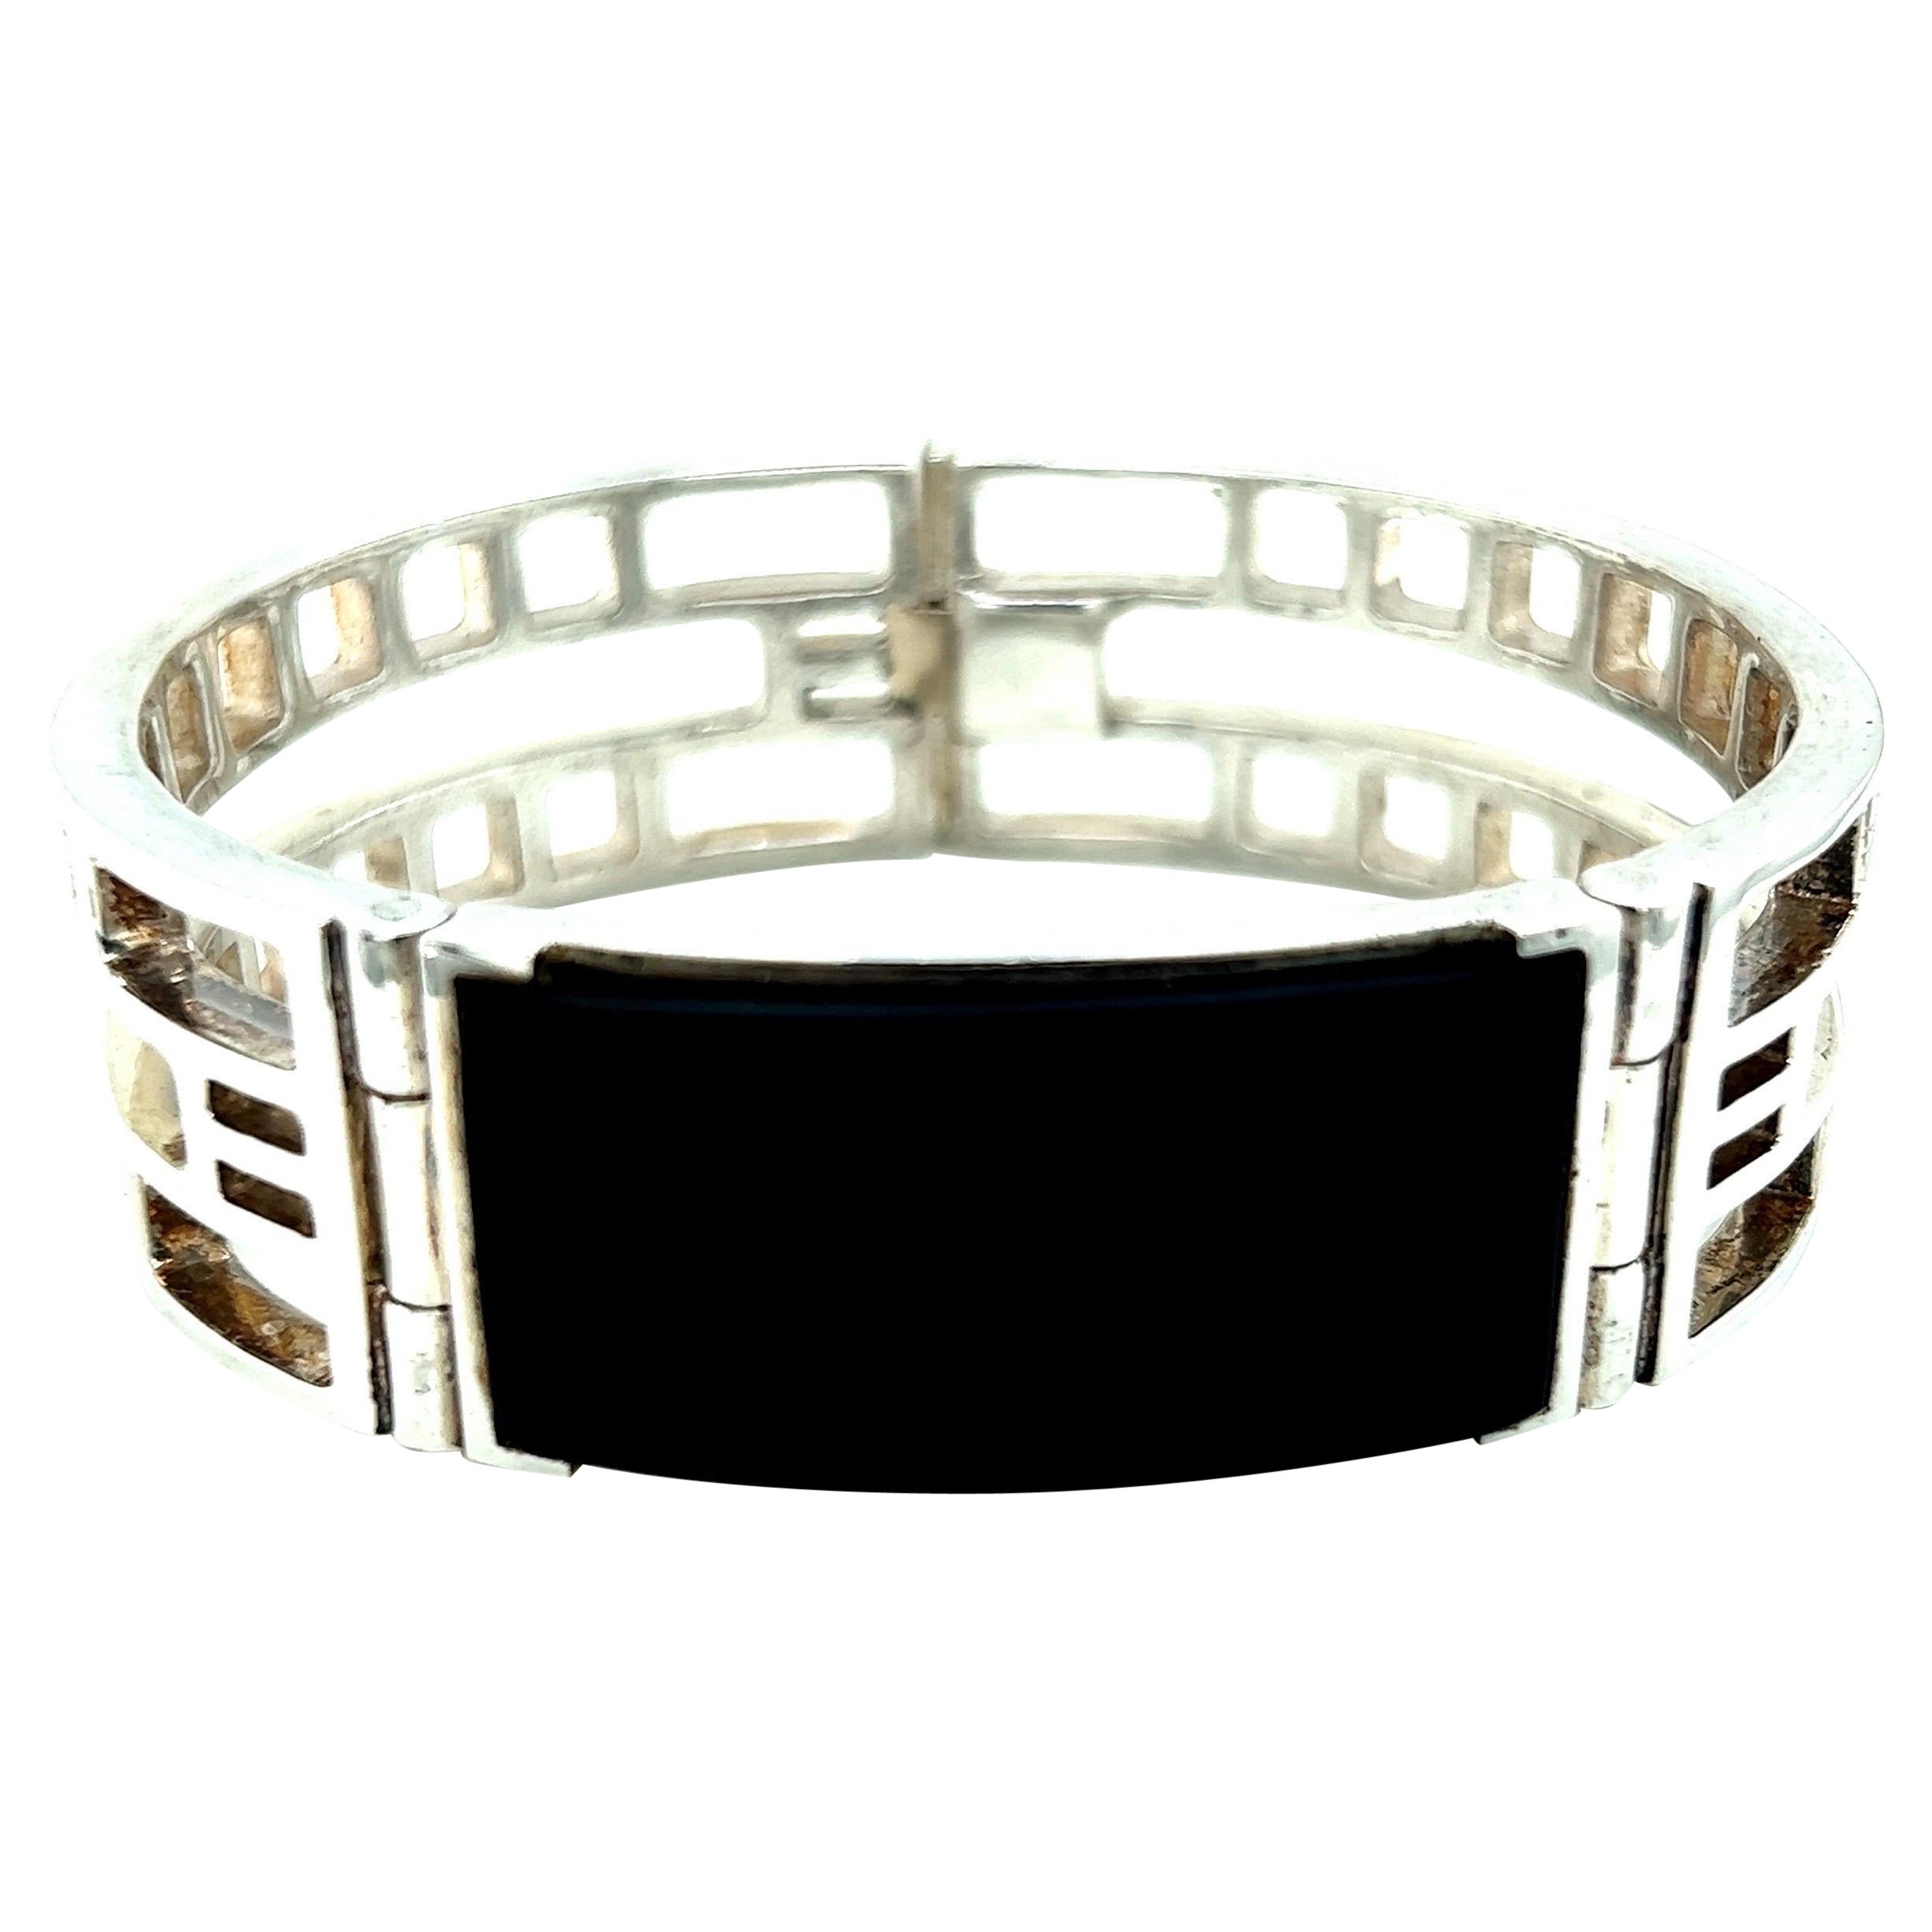 Art Deco Style ID Bracelet with Black Onyx in Sterling Silver